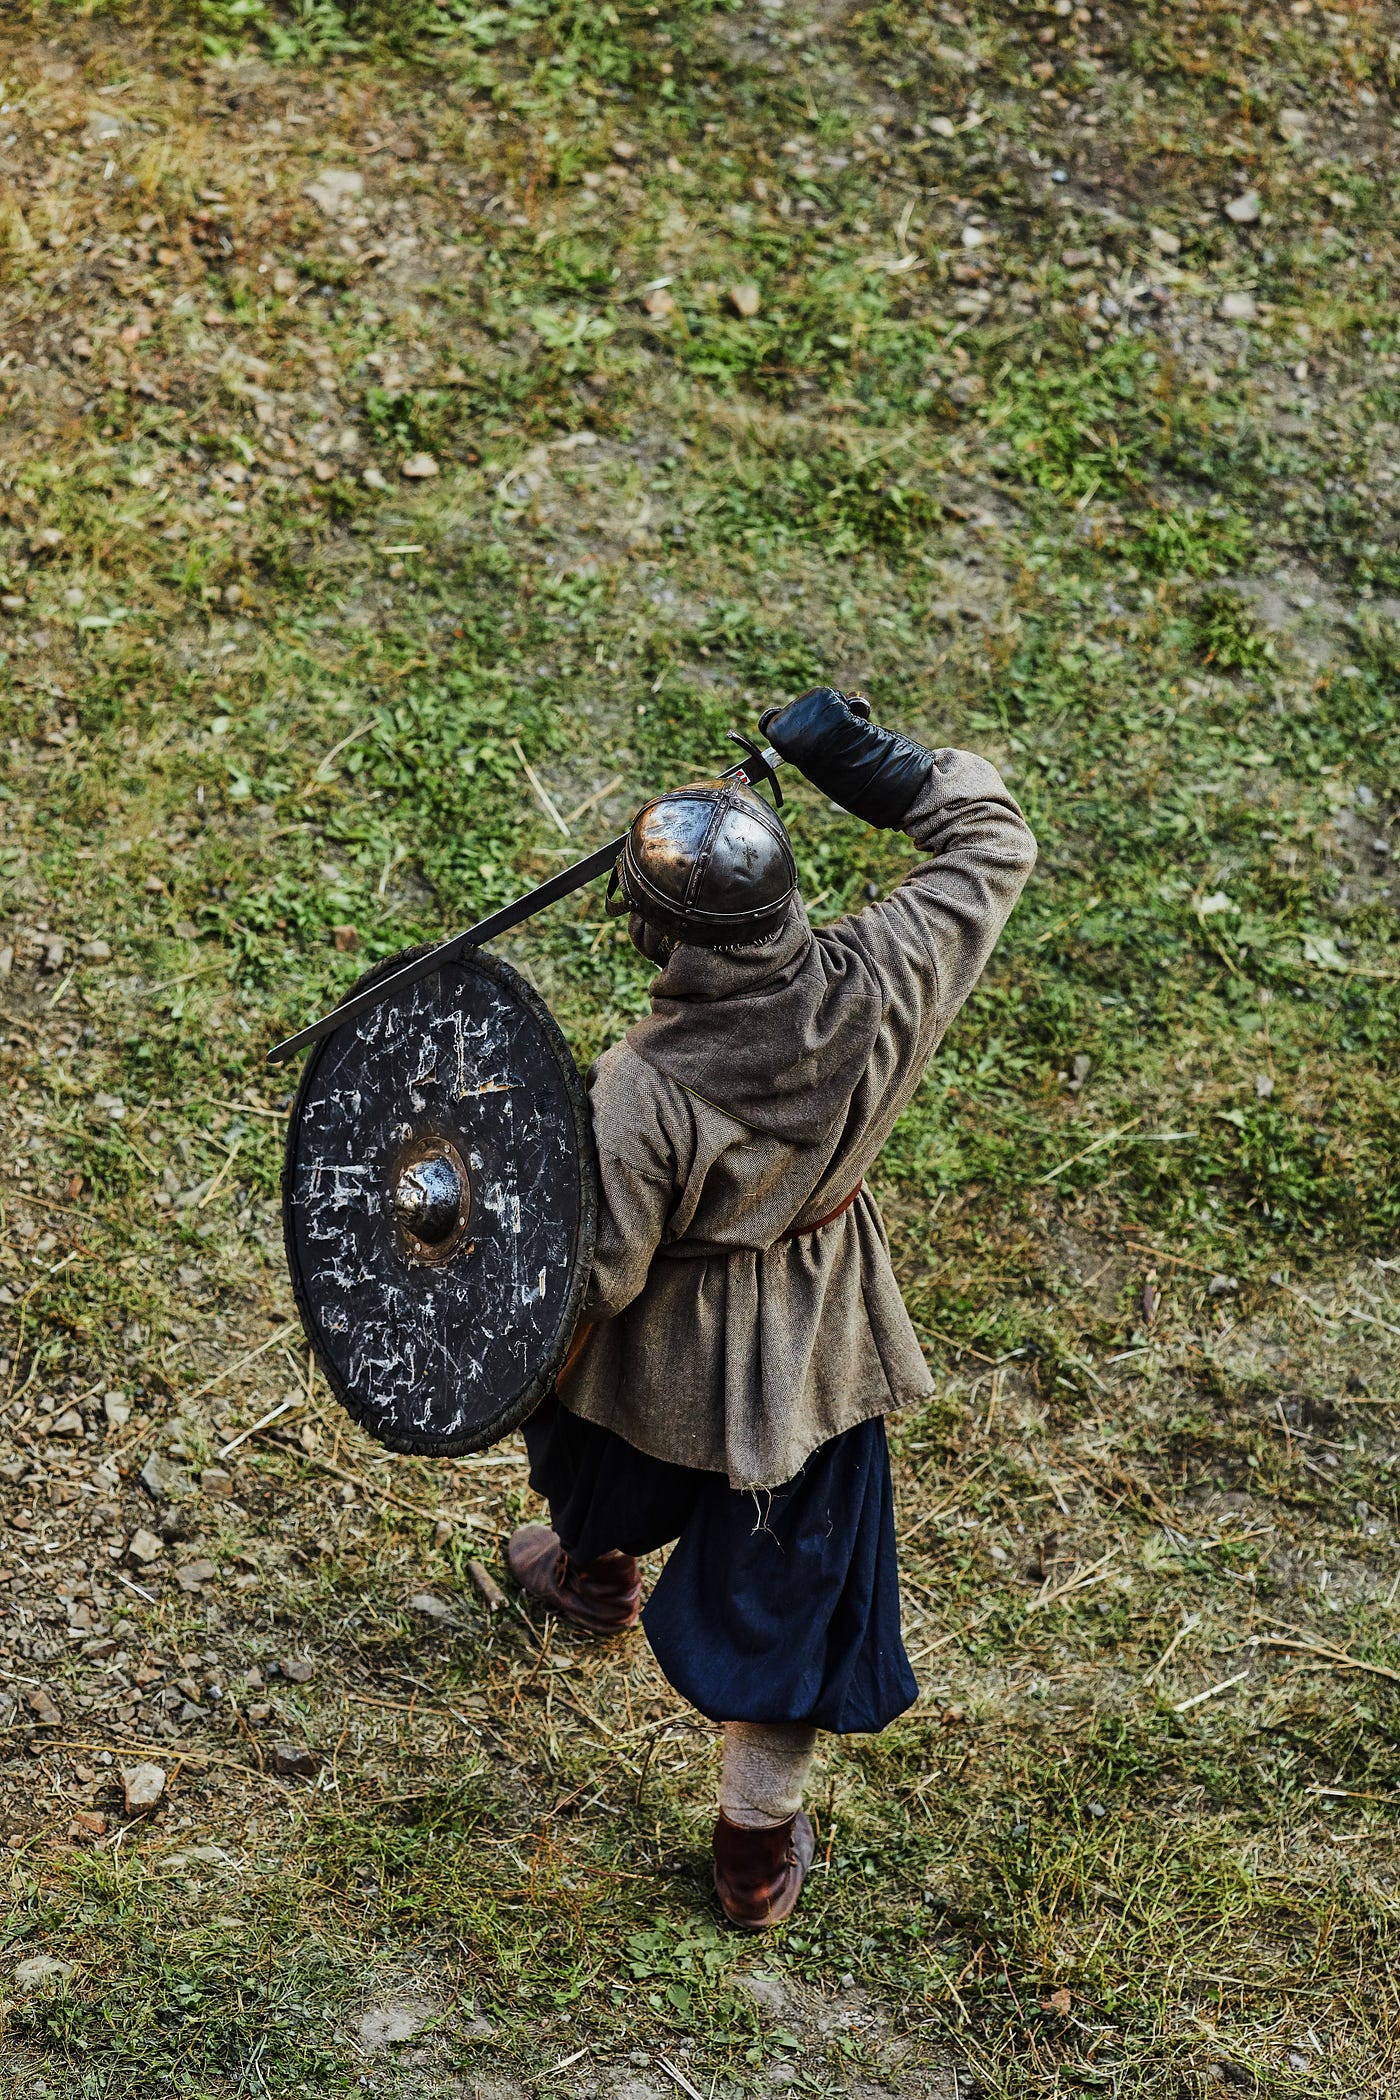 A medieval/Viking cosplayer is seen from above, standing alone in a muddy, grassy field. No face is visible. The individual’s back is to the viewer. They wear a metal helmet without horns, carry a dull metallic shield and hold their dull metal sword across their chest. They are dressed in a brownish-grey tunic top with a hood, the material is coarse. Their pants are billowed and navy blue. Their boots are brown leather and with canvas uppers.